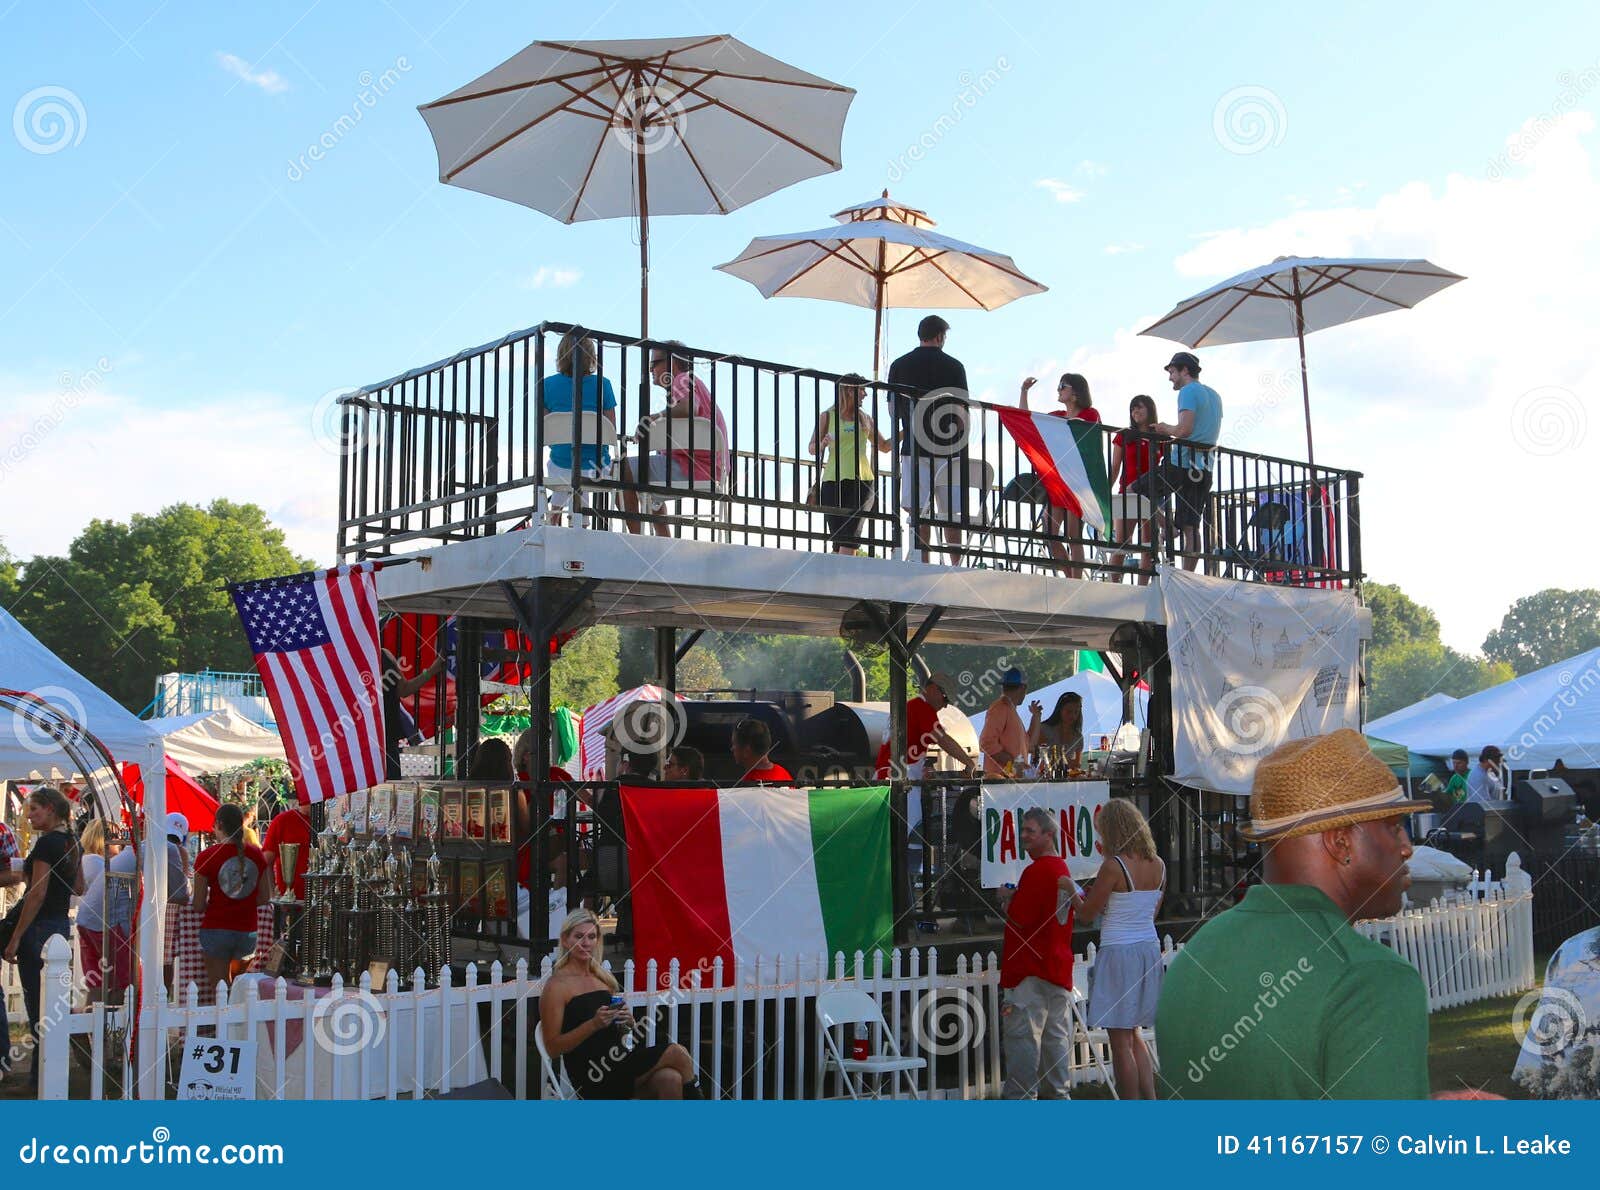 People Dine at an Elevated Eatery at the Memphis Italian Festival